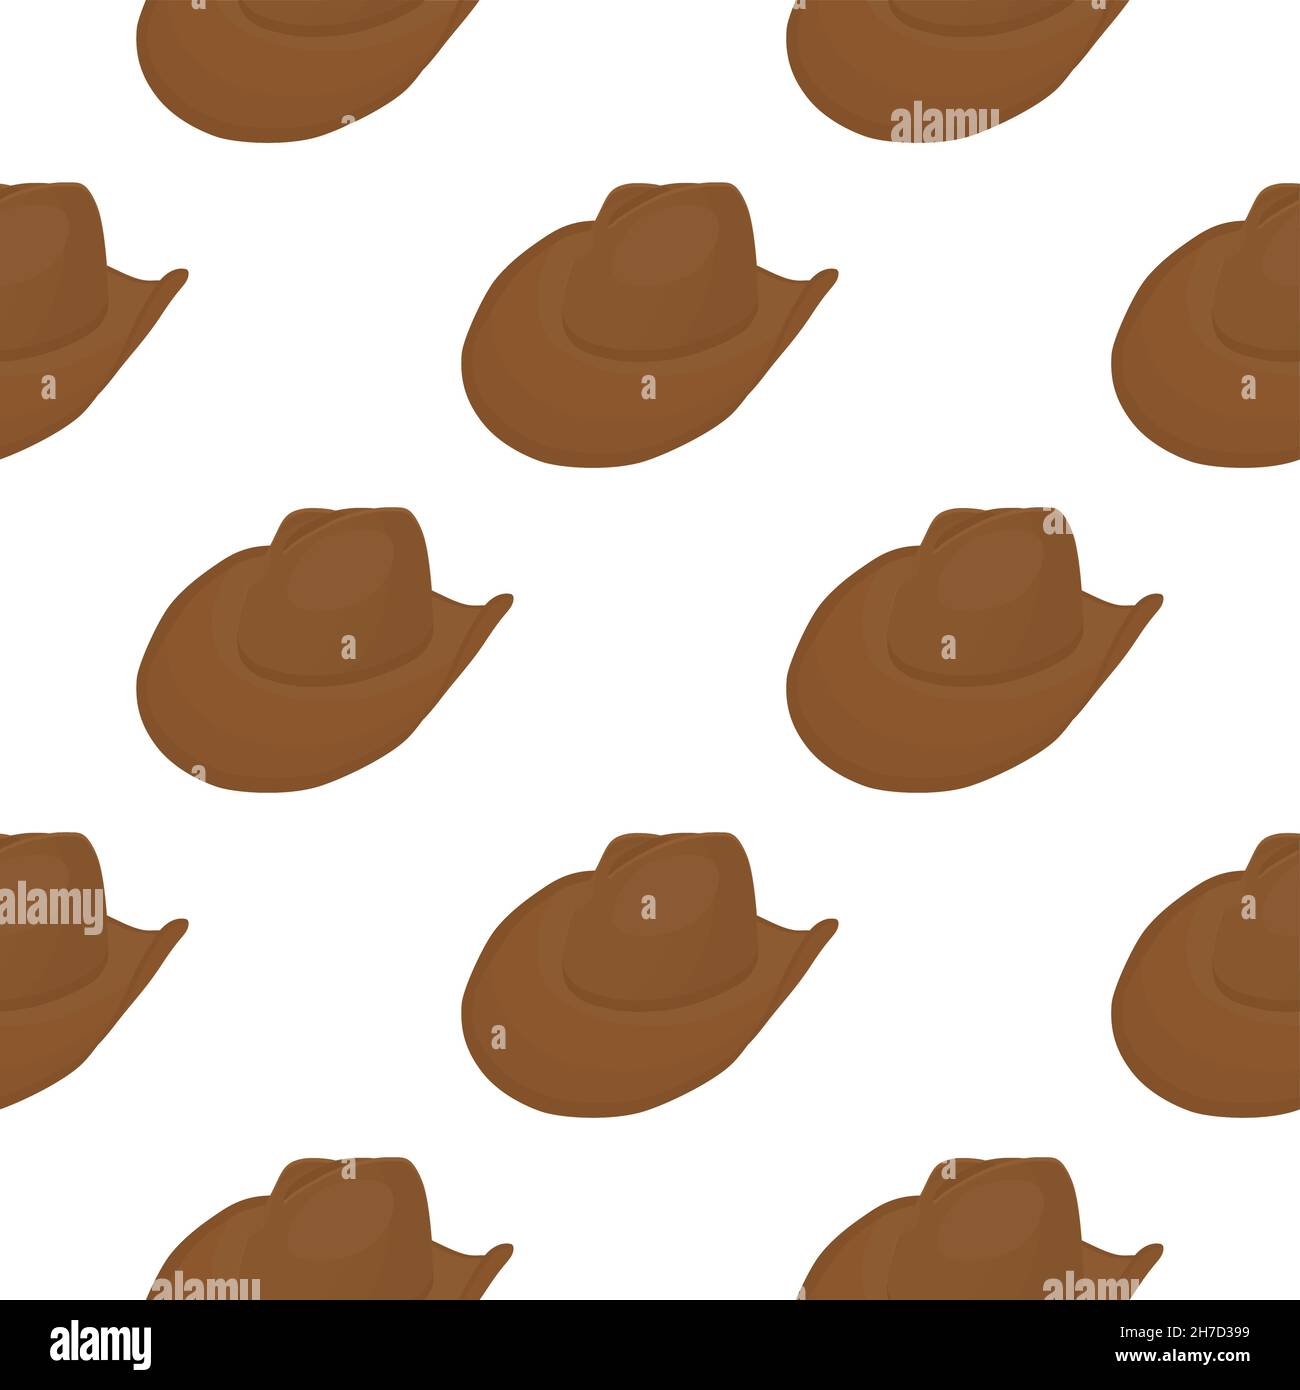 Illustration on theme colored pattern hats cowboy, beautiful caps in white background. Caps pattern consisting of collection hats cowboy for wearing. Stock Vector